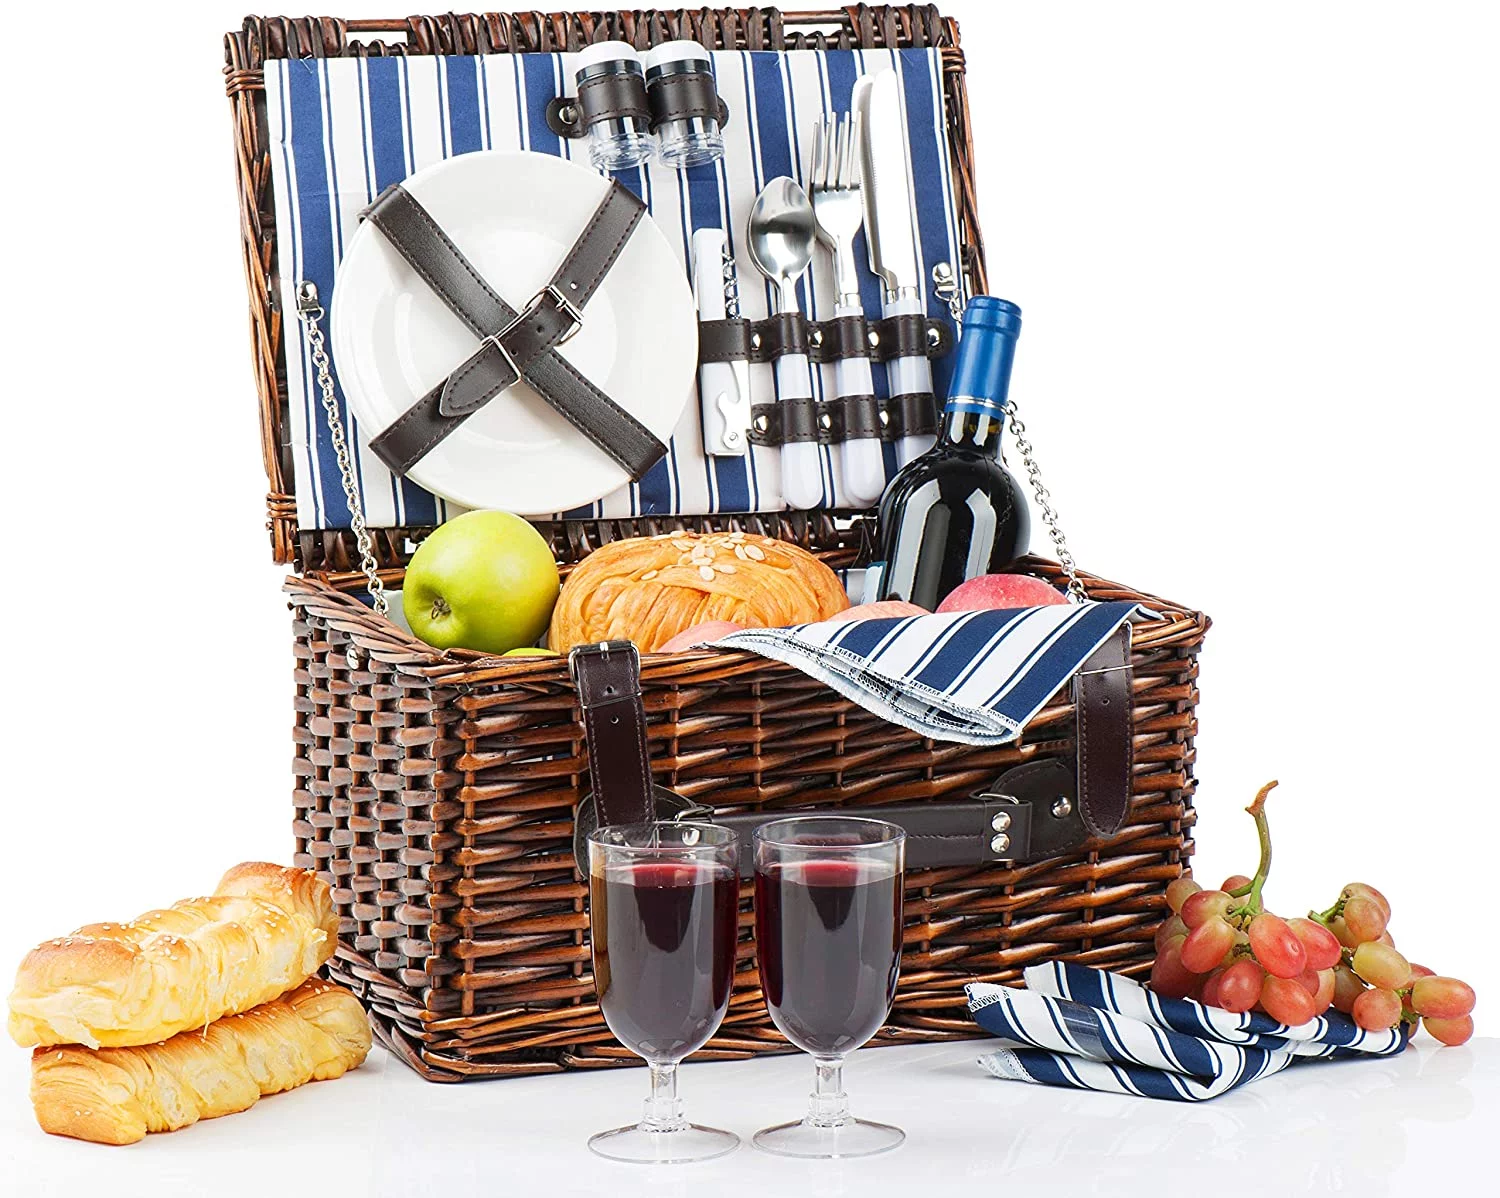 What Are Picnic Baskets Made Of